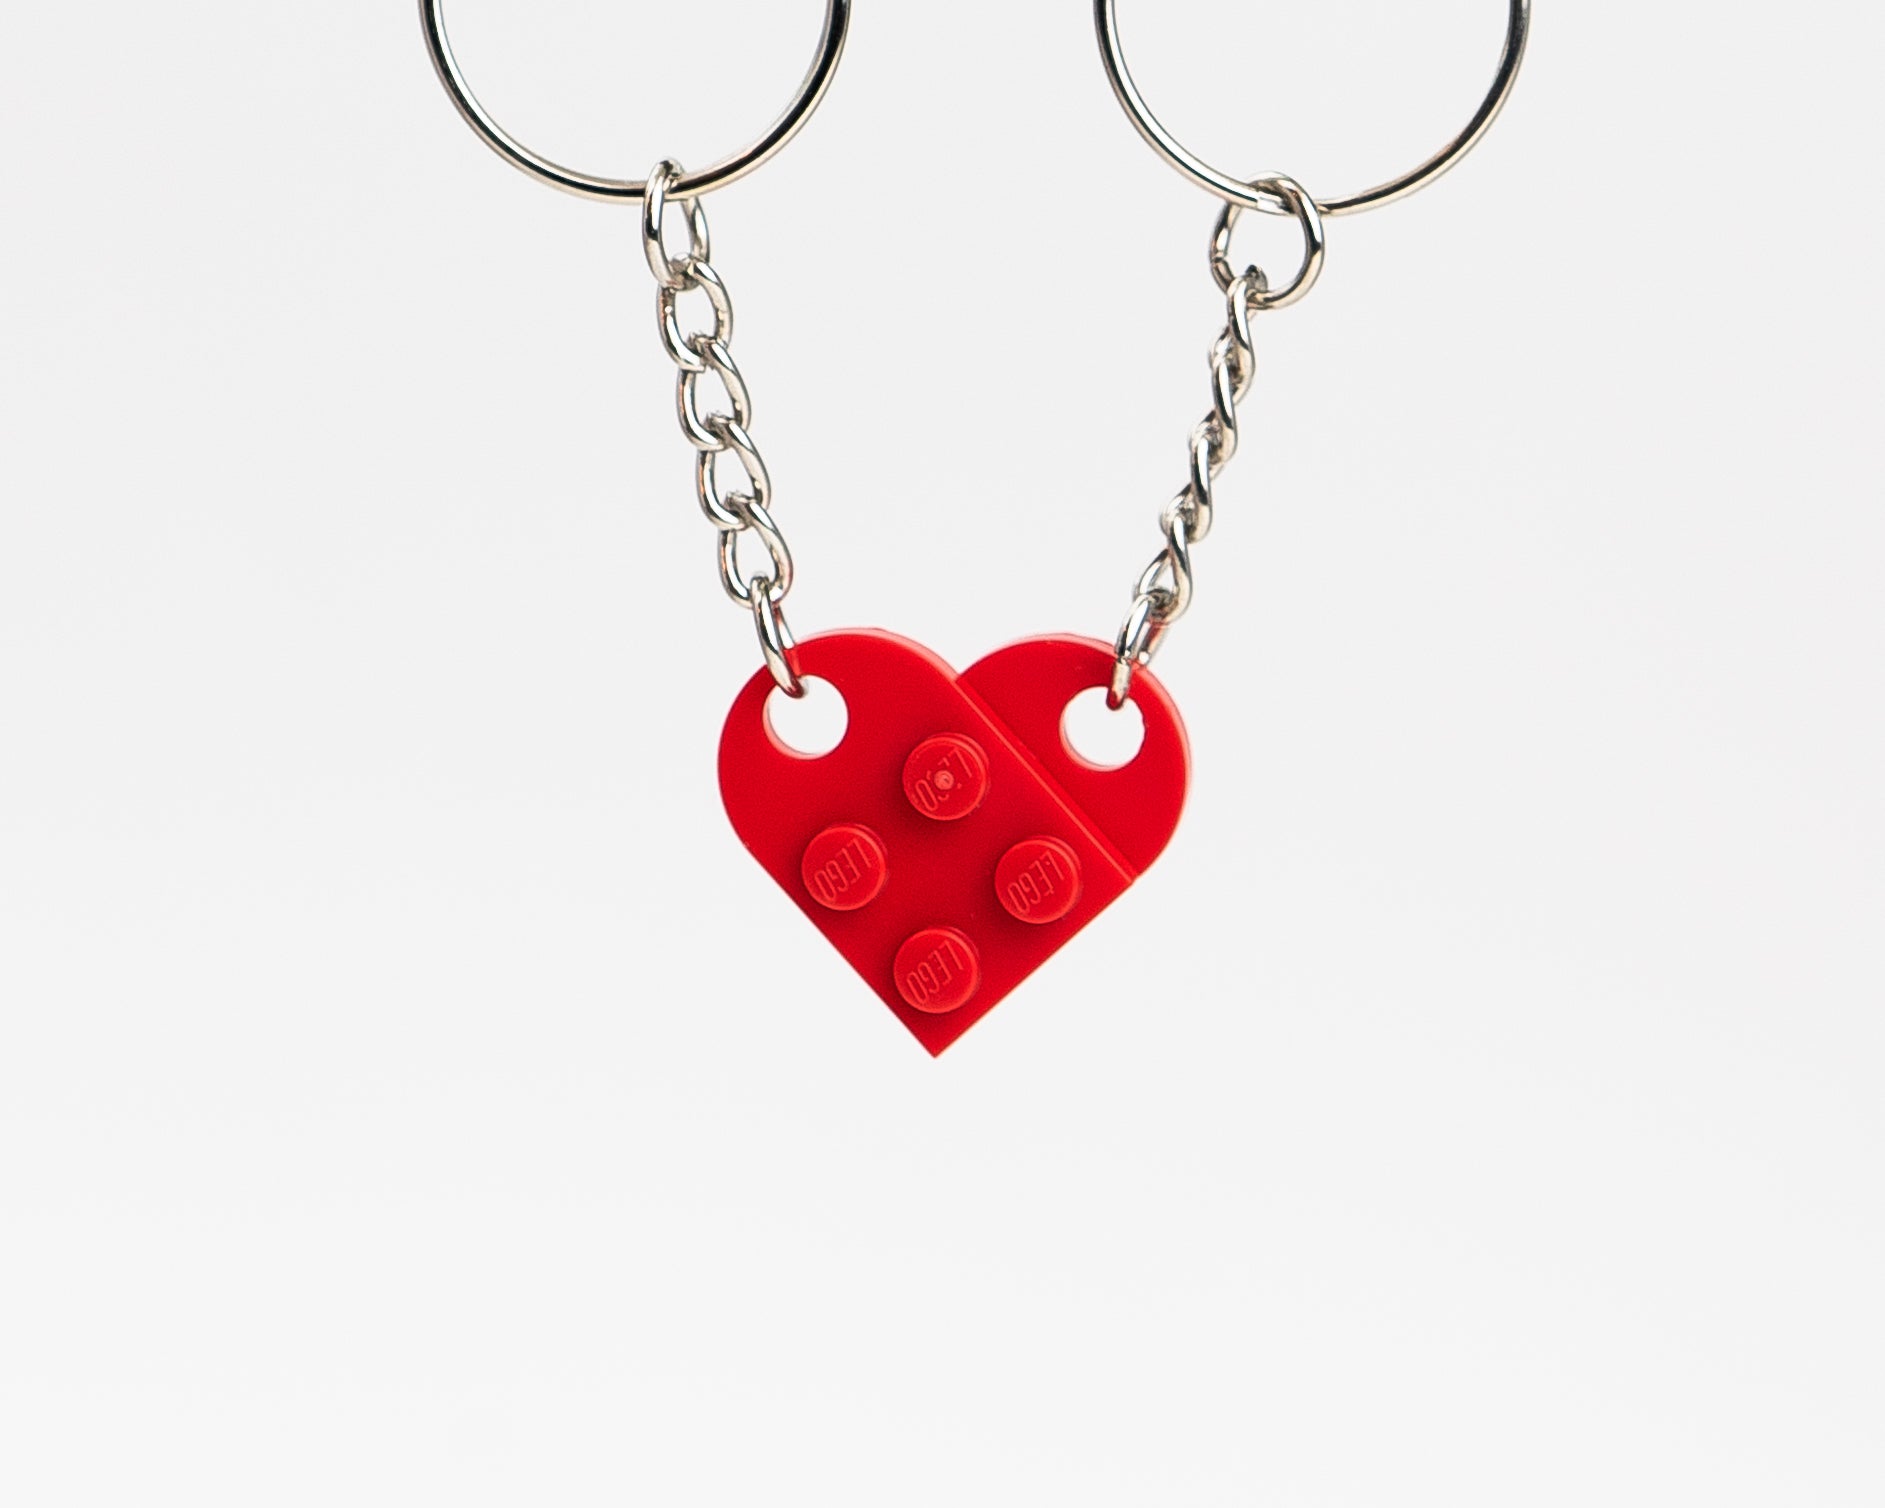 Lego Heart Keychain for Two